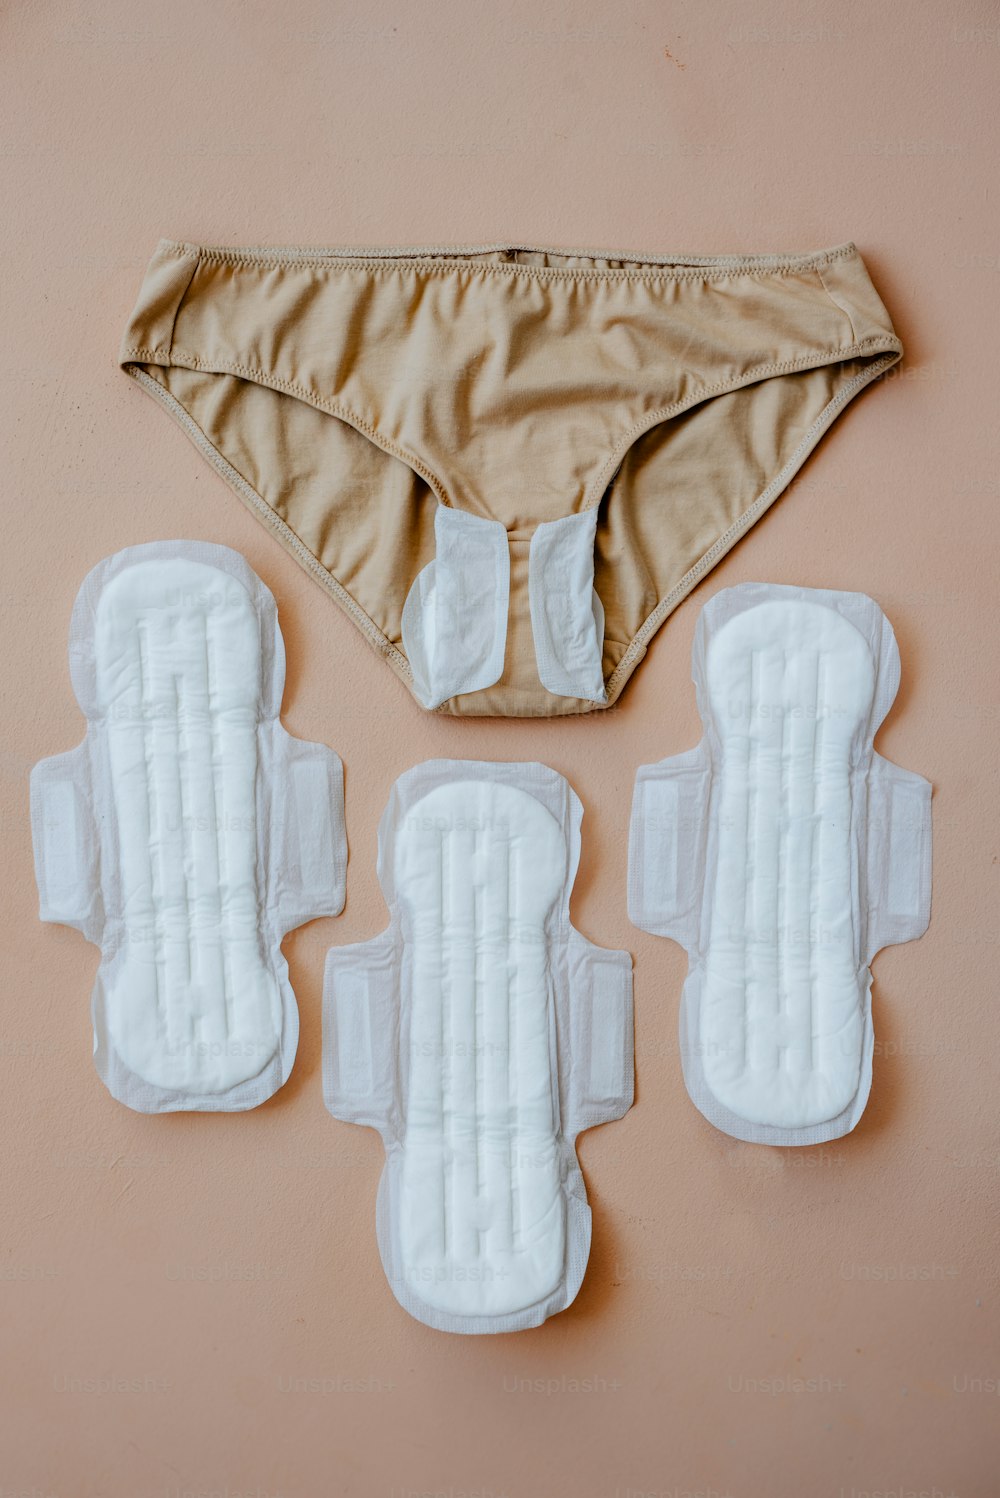 a pair of underwear and underwear pads on a pink surface